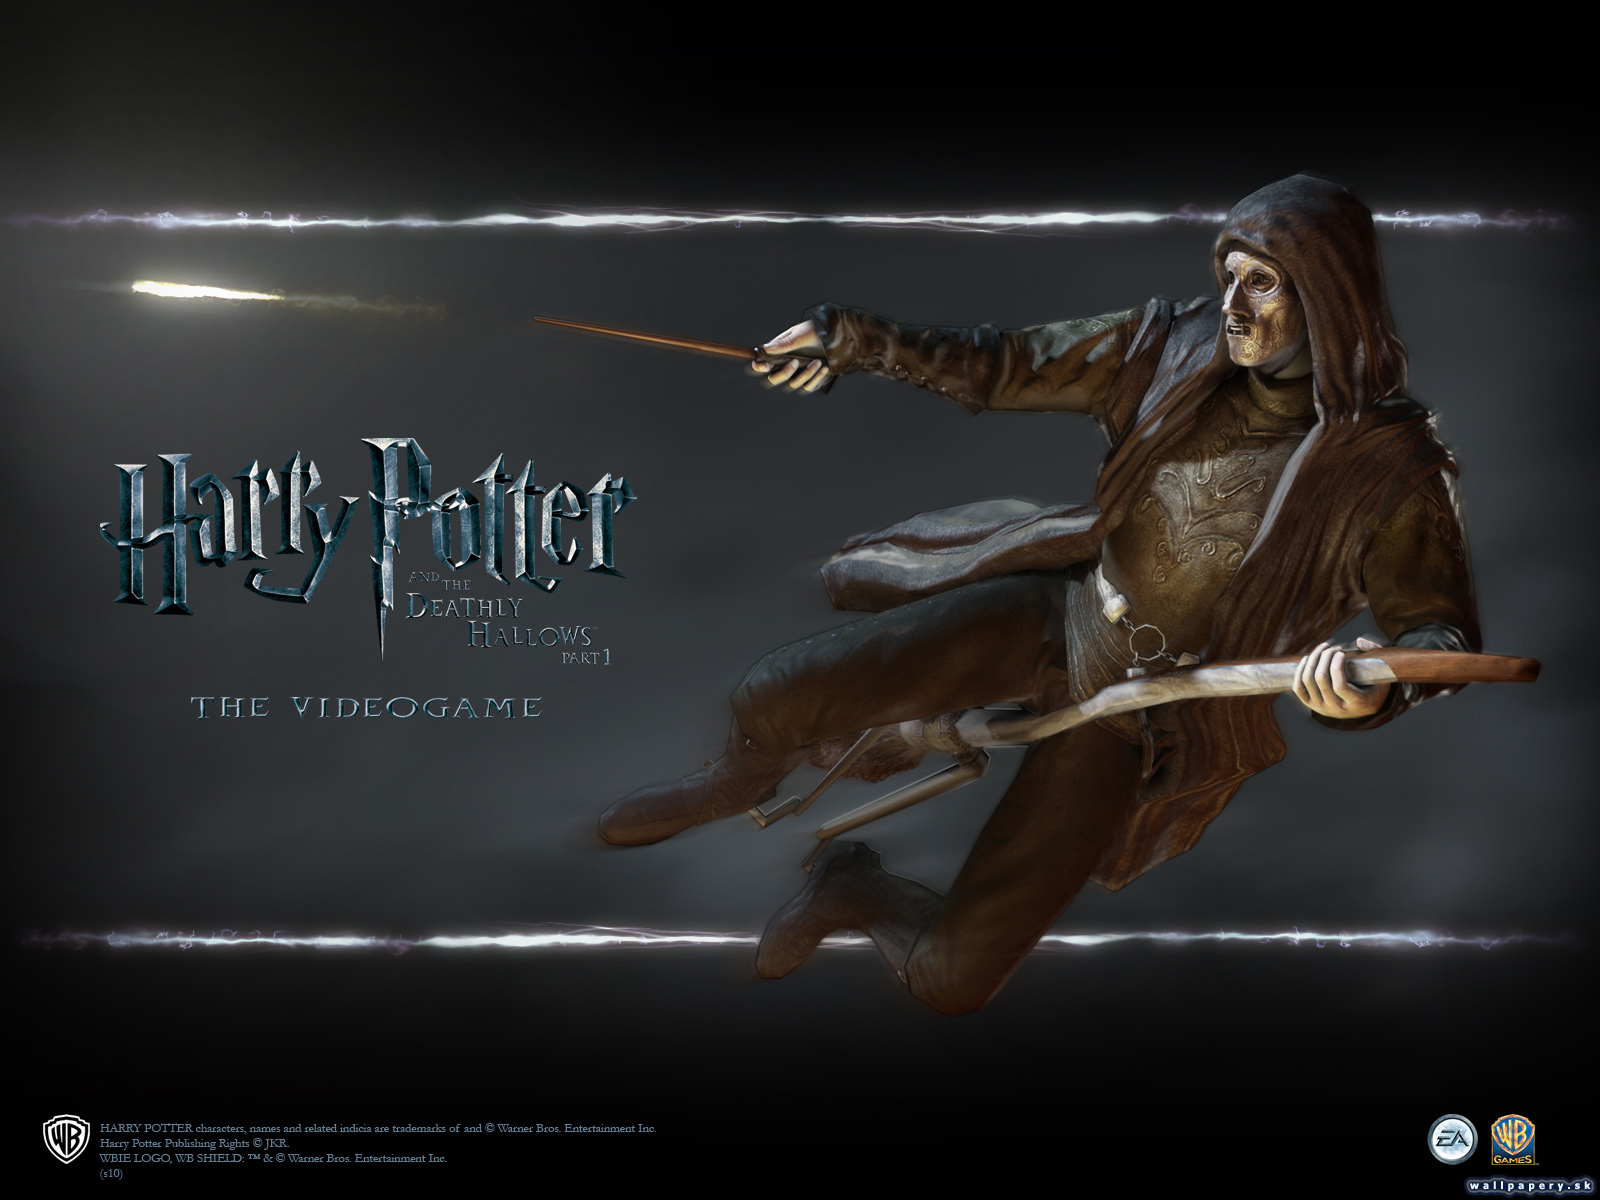 Harry Potter and the Deathly Hallows: Part 1 - wallpaper 5